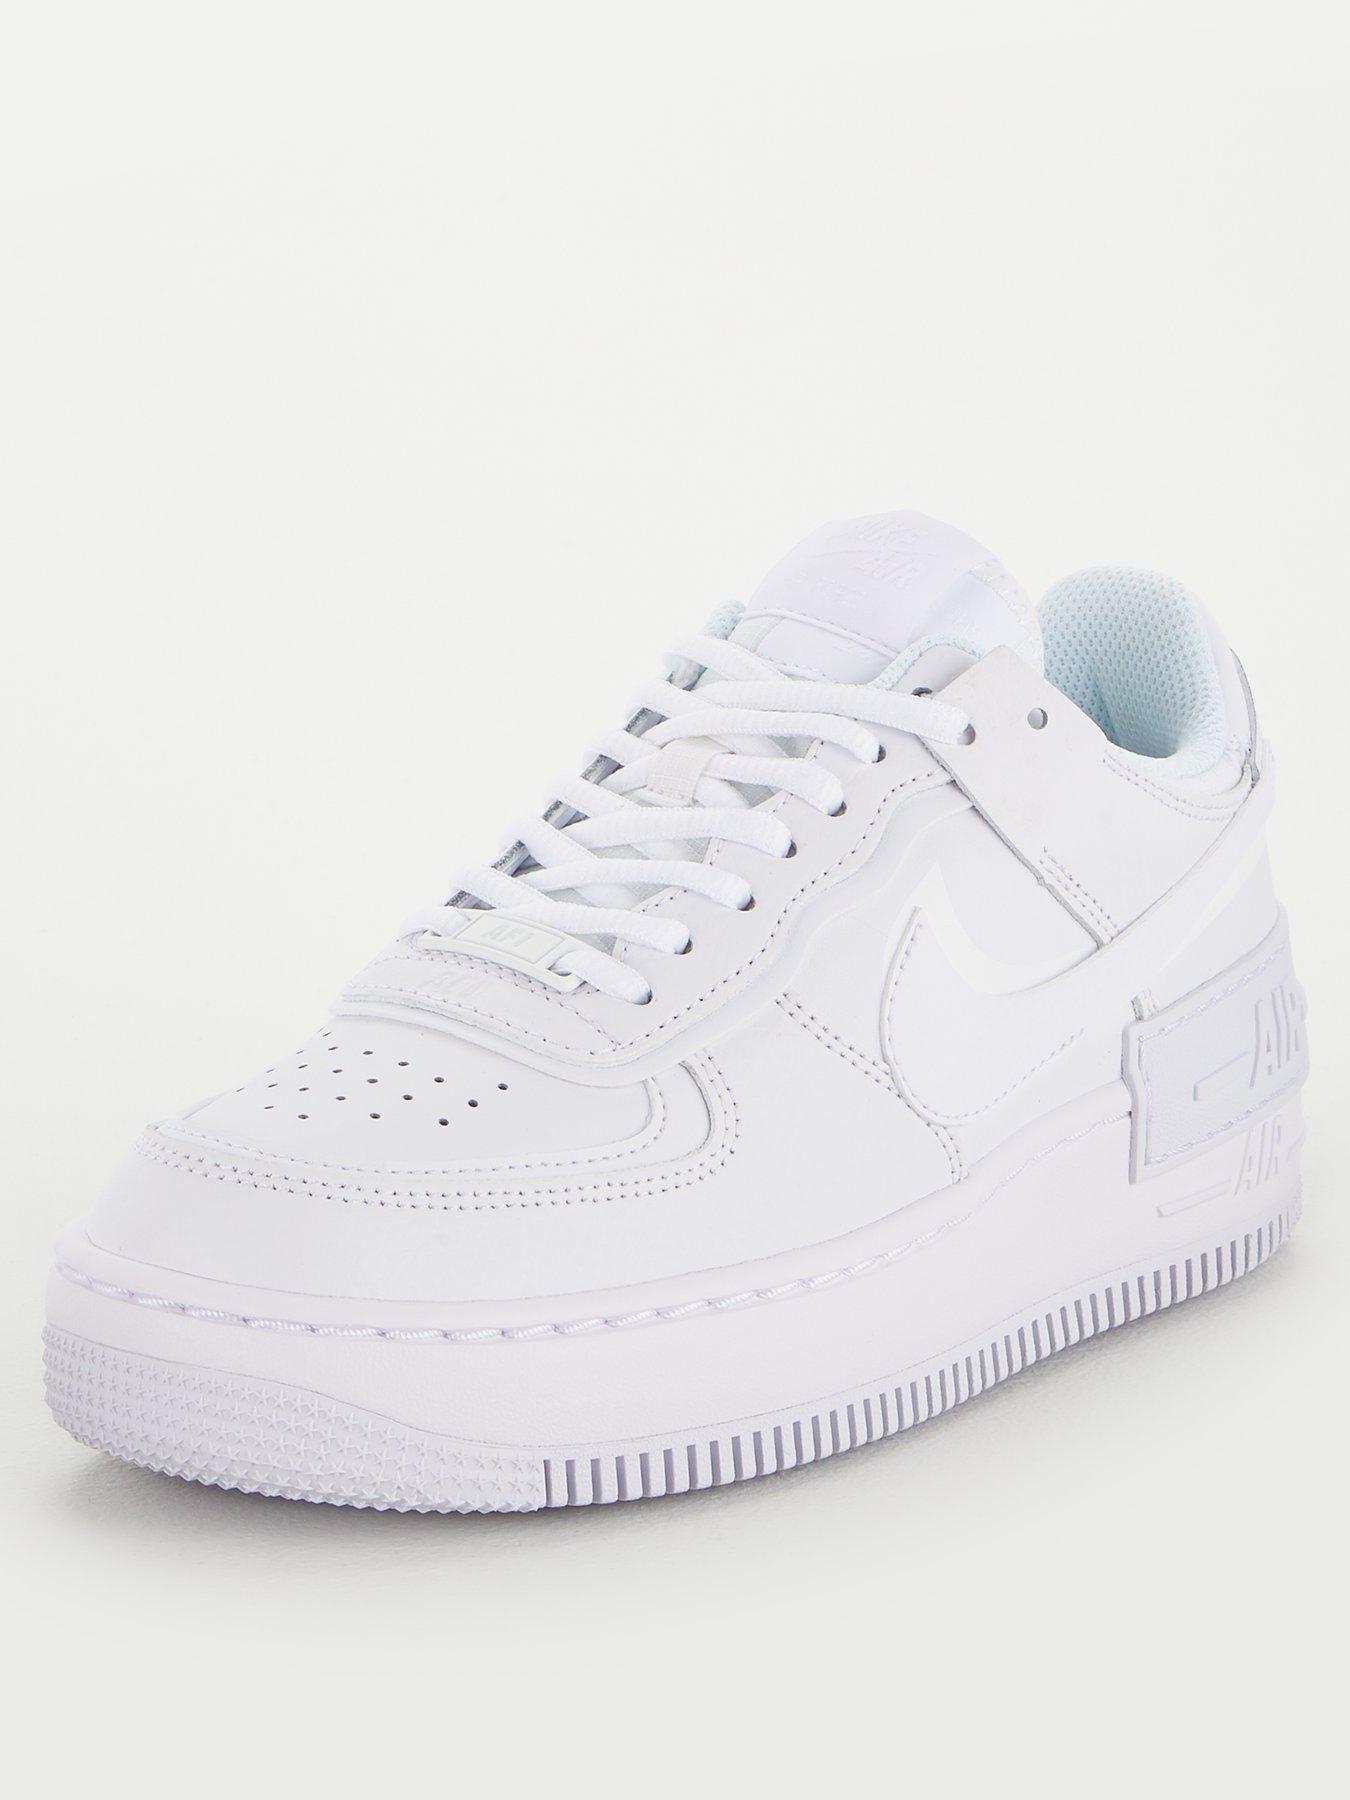 littlewoods nike air force